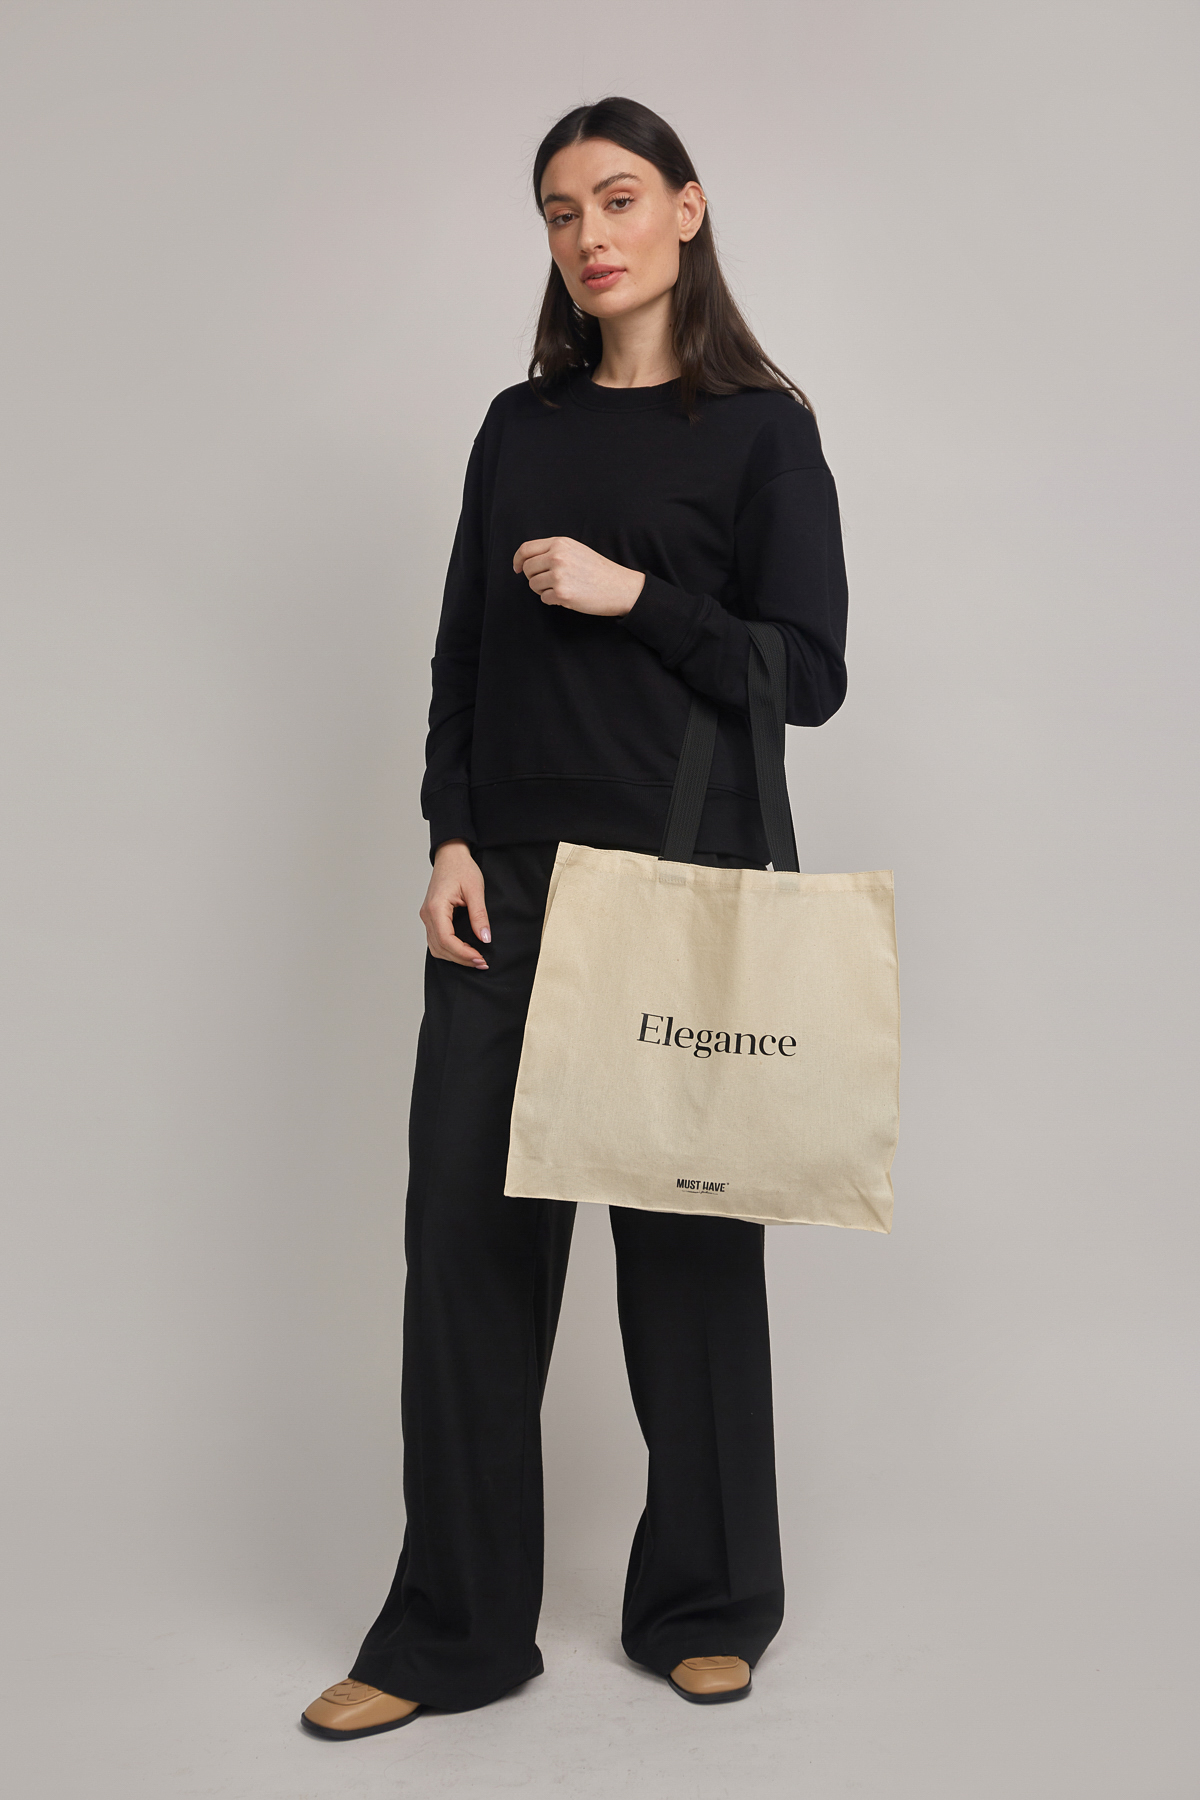 Large eco-bag with the inscription "Elegance", photo 2